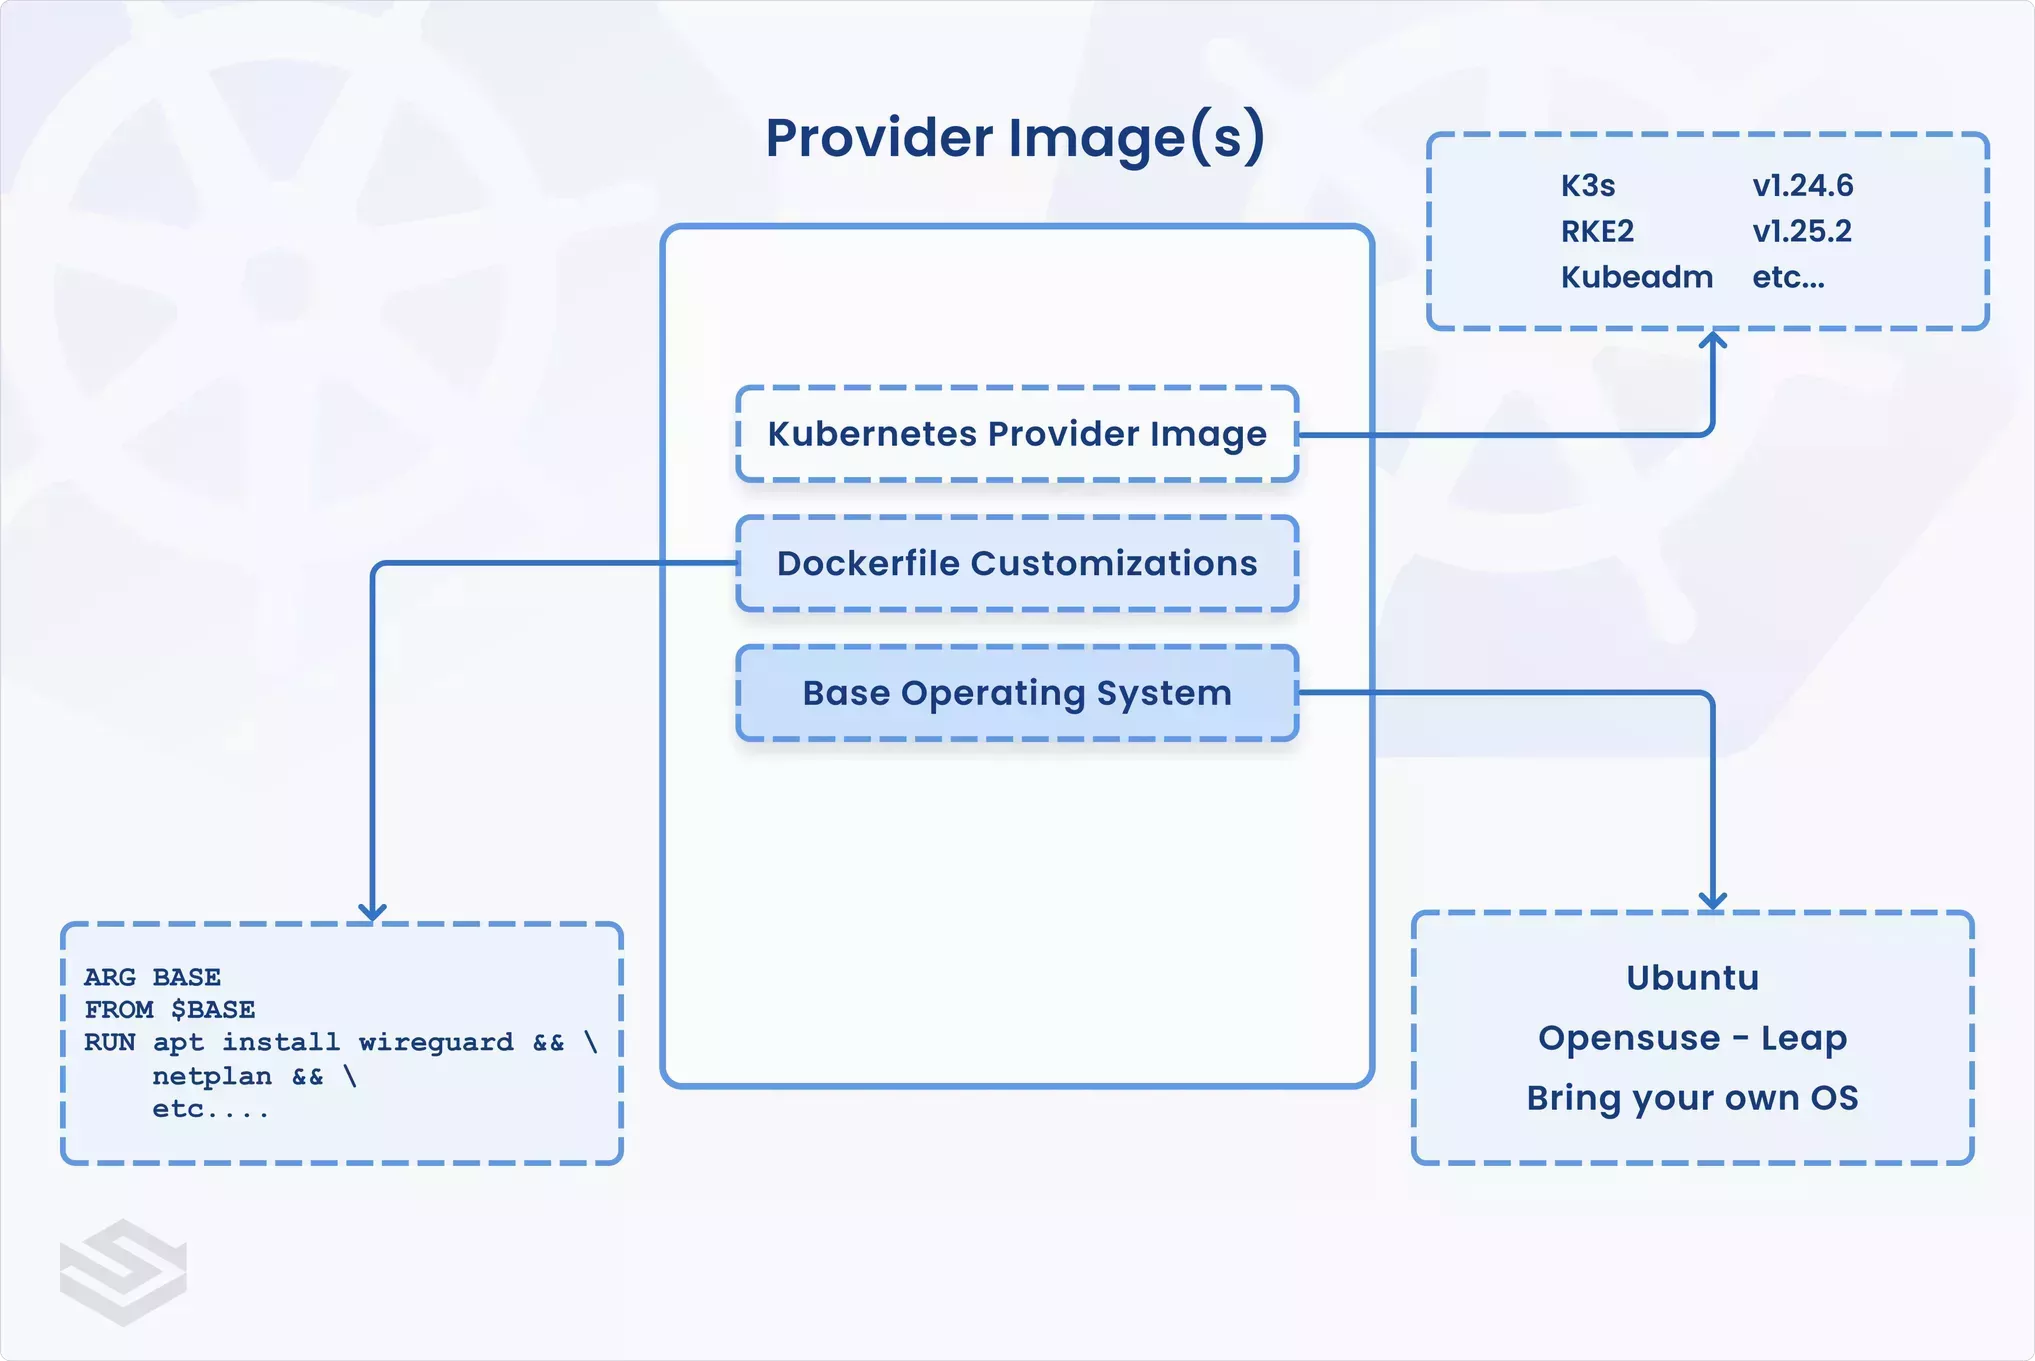 A diagram breaking up the internal components of the Edge Provider container images